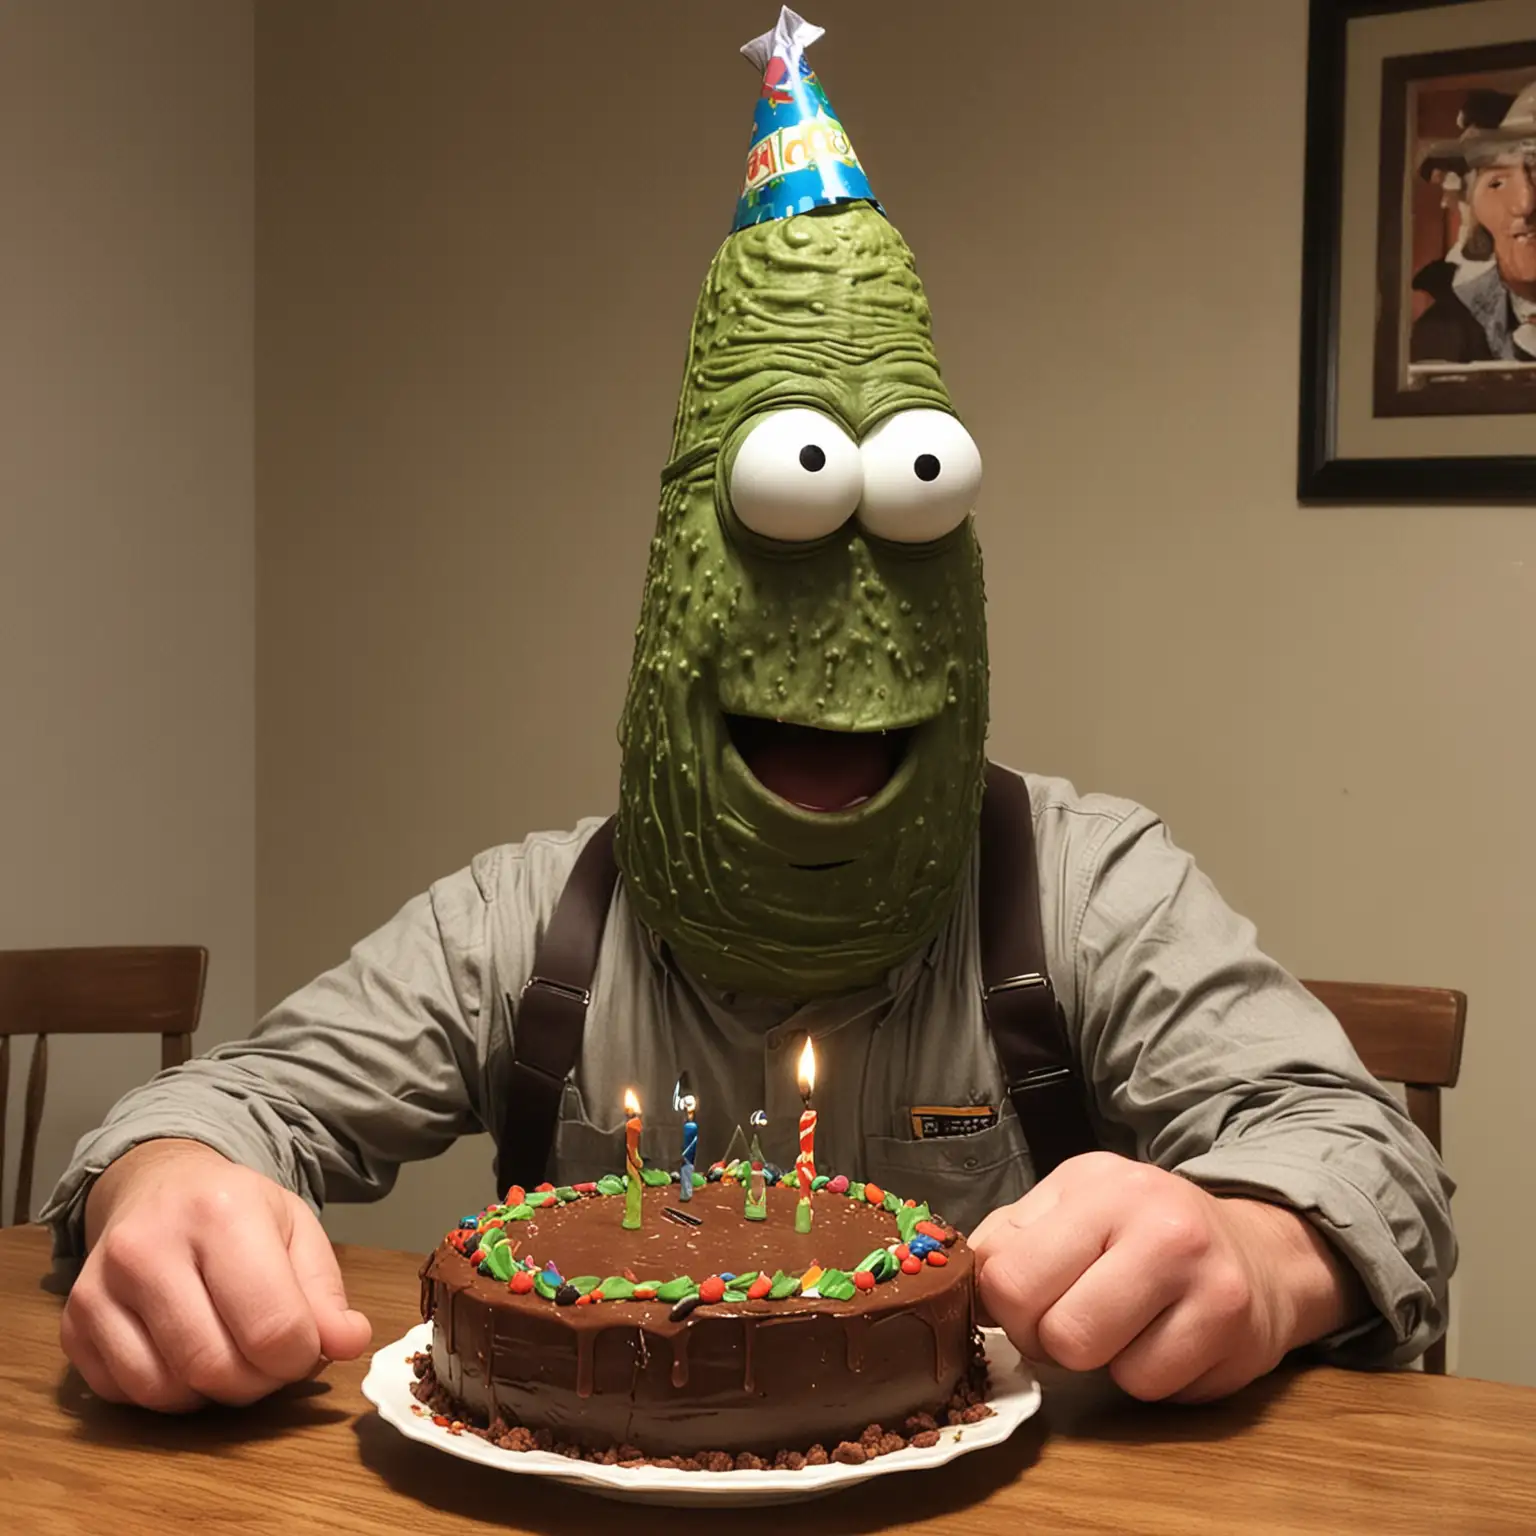 Pickle Carl Celebrating His 40th Birthday A Festive Moment for a Vintage Pickle